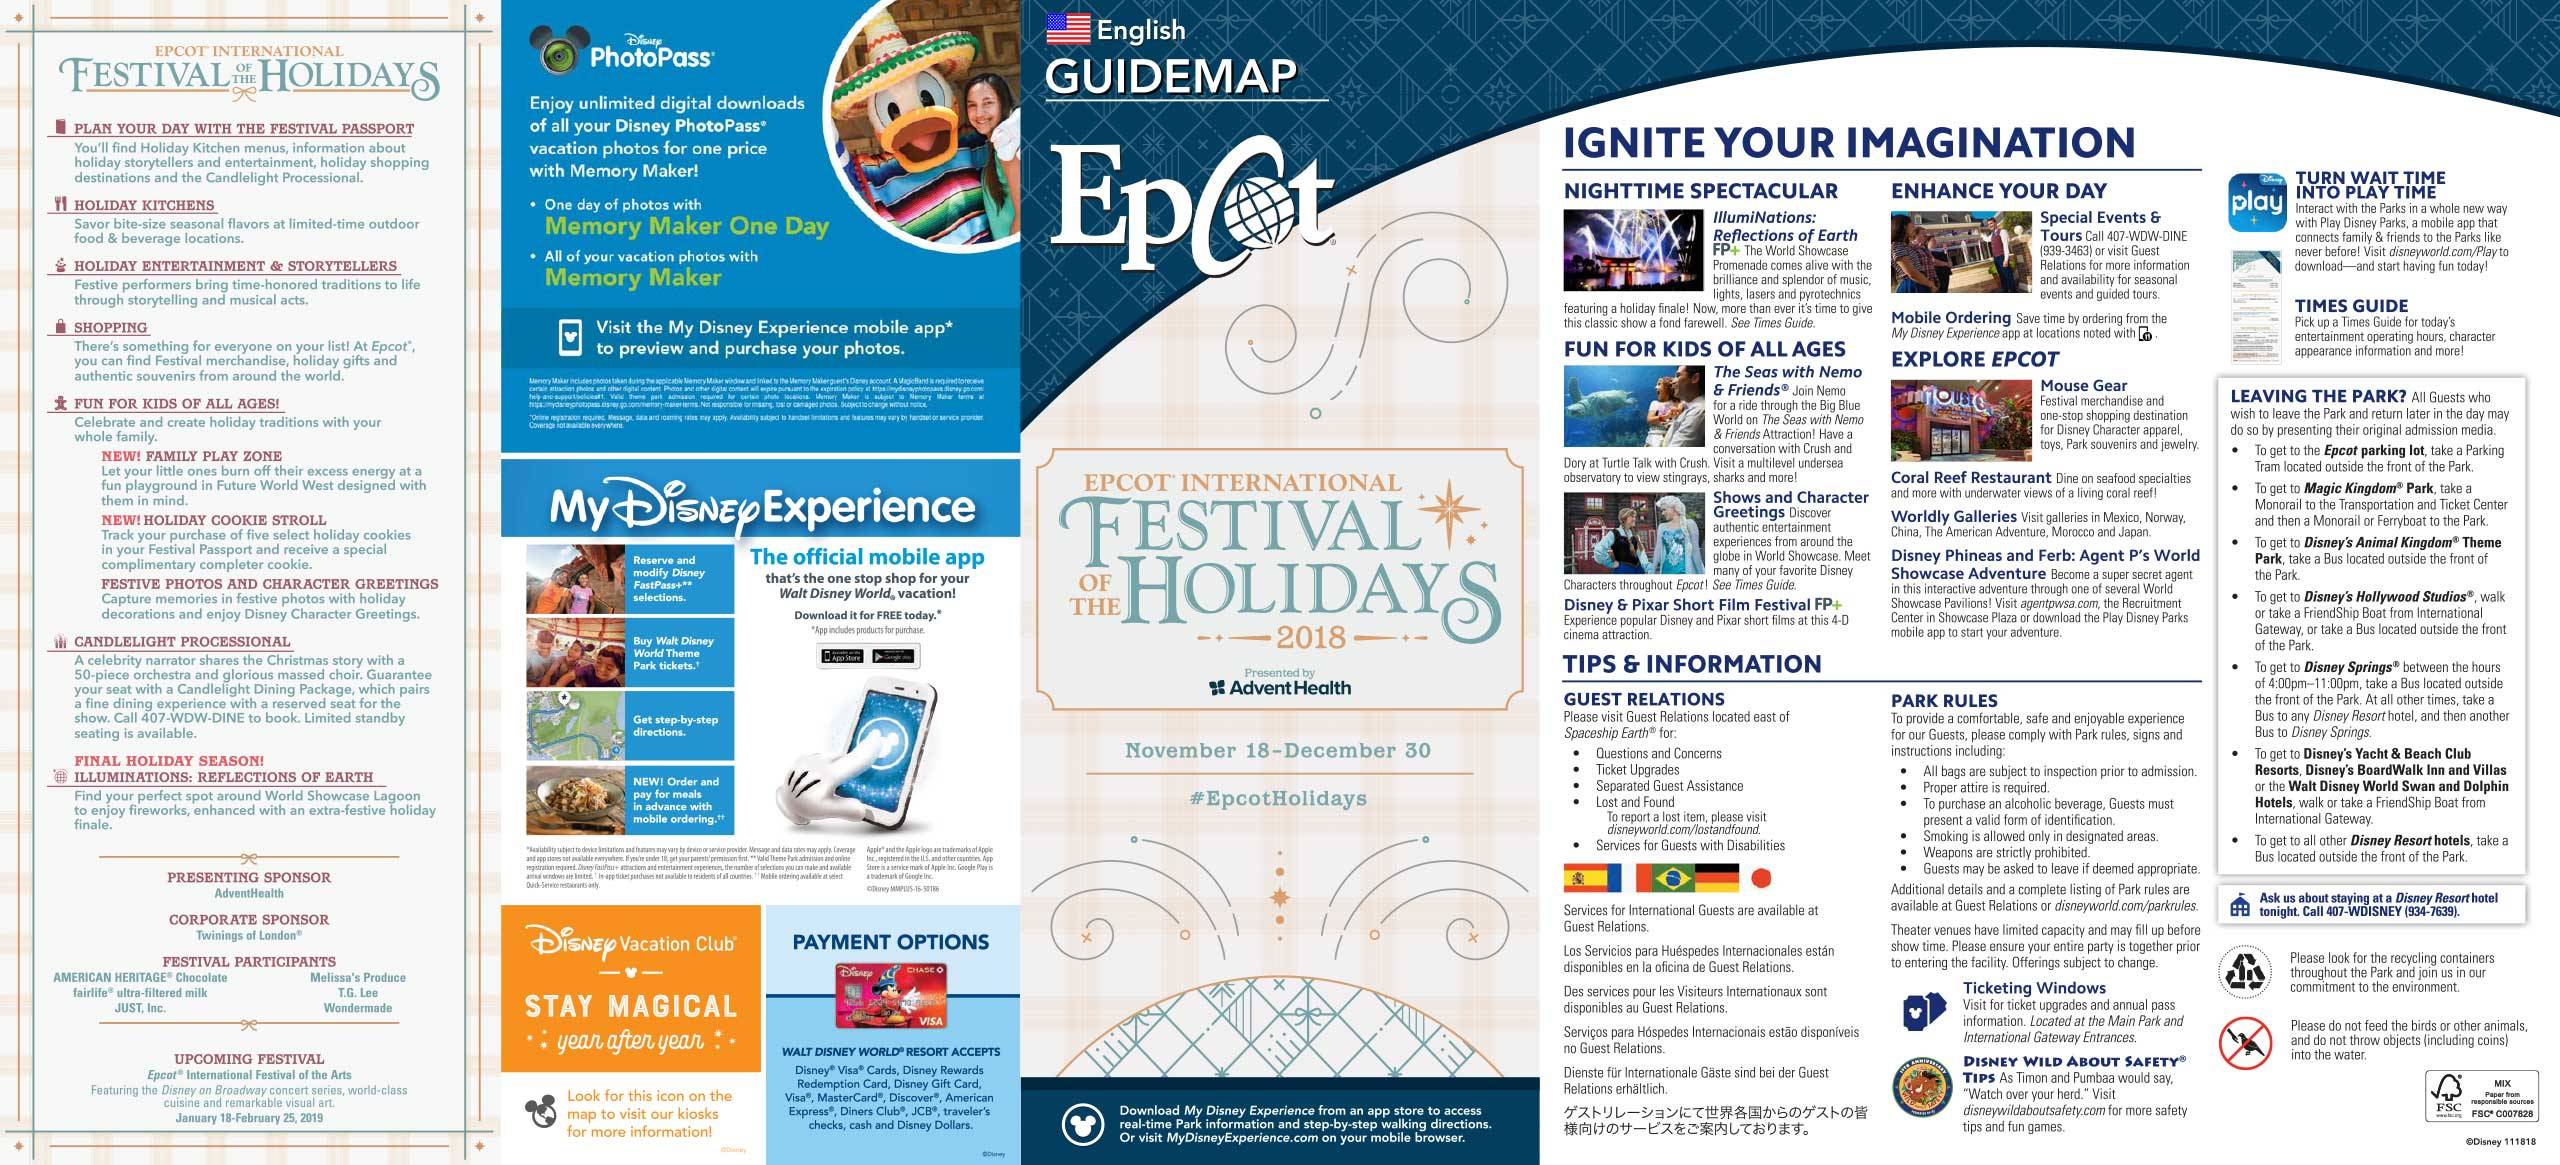 2018 Epcot Festival of the Holidays guide map and times guide